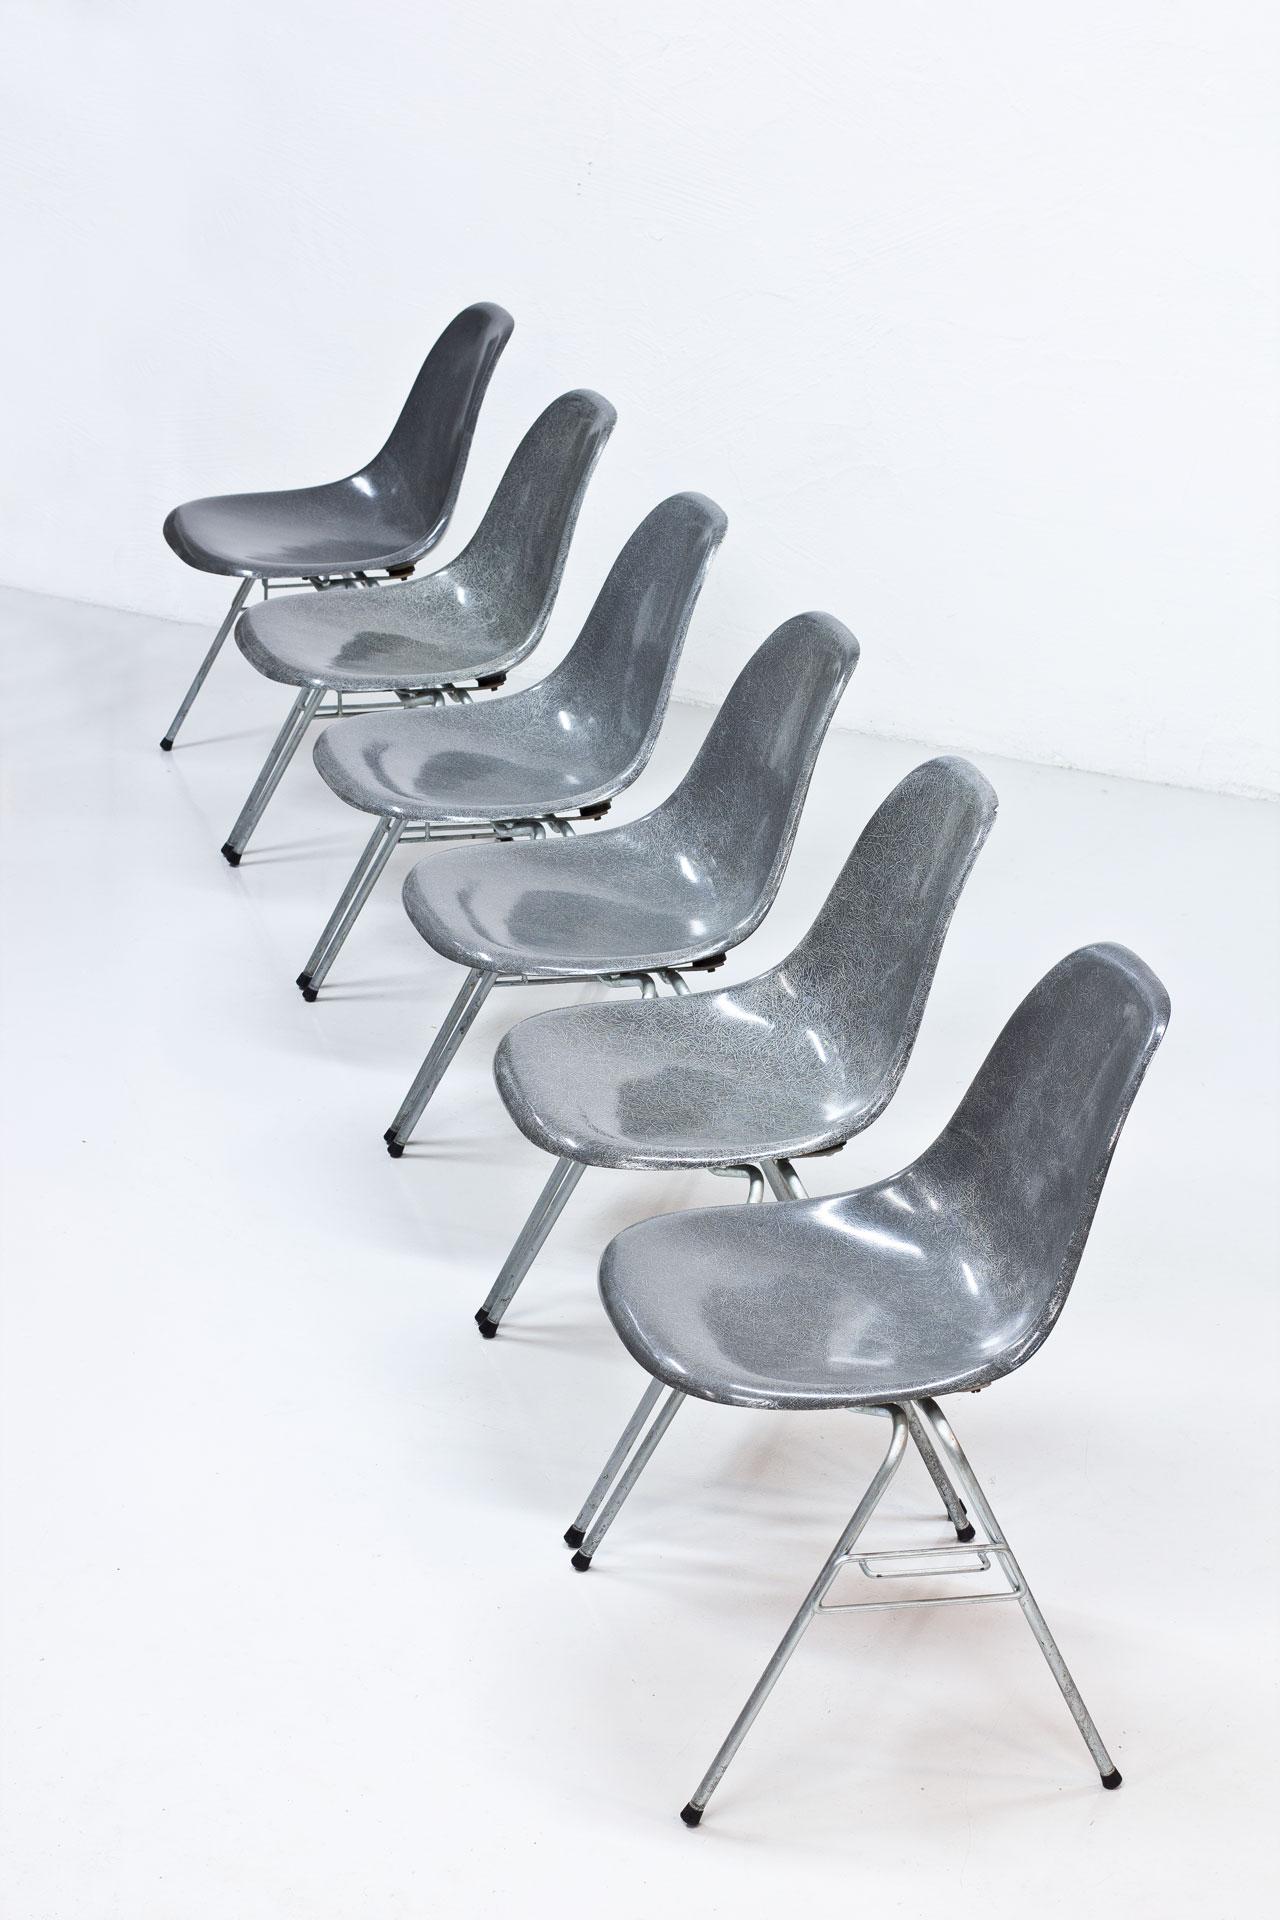 Set of six “DSS” (Dining height, side chair,
on stacking base) chairs designed by Charles
and Ray Eames. Manufactured by Hille under
licence from Herman Miller, circa 1960.
Elephant grey fiberglass shells on original
zinc tubular steel base.